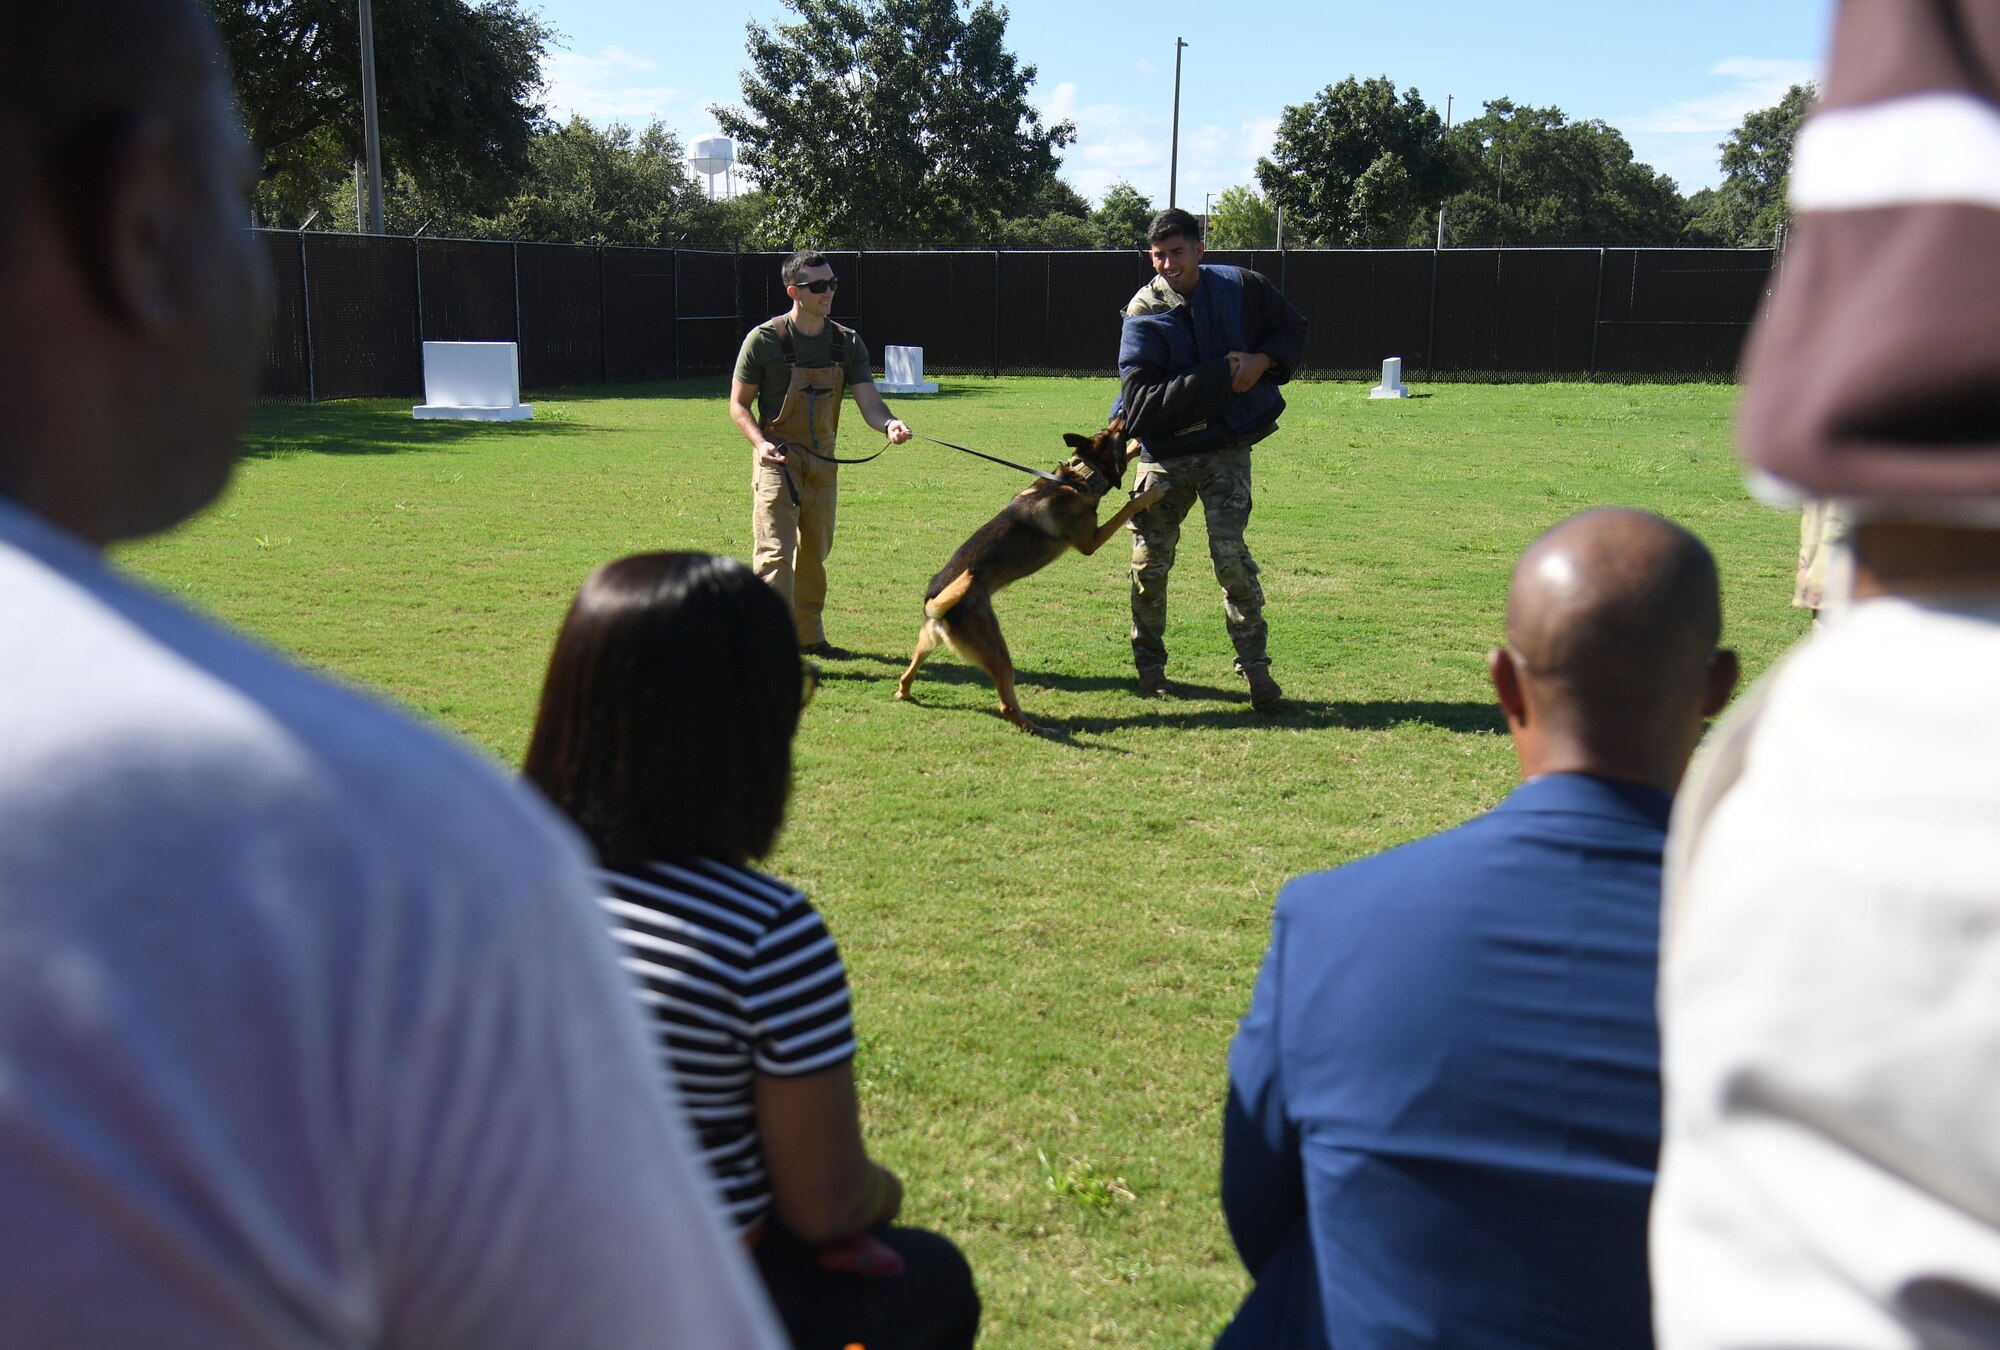 U.S. Air Force Staff Sgt. Dustin Hadsock and Senior Airman Anthony Seretis, 81st Security Forces Squadron military working dog handlers, and Rico, 81st SFS military working dog, perform a demonstration during the Mississippi Educators Tour for Law and Public Safety and Fire Science tour at Keesler Air Force Base, Mississippi, July 27, 2022. More than 30 educators also toured the Keesler Fire Department and received an 81st SFS virtual reality training demonstration. (U.S. Air Force photo by Kemberly Groue)